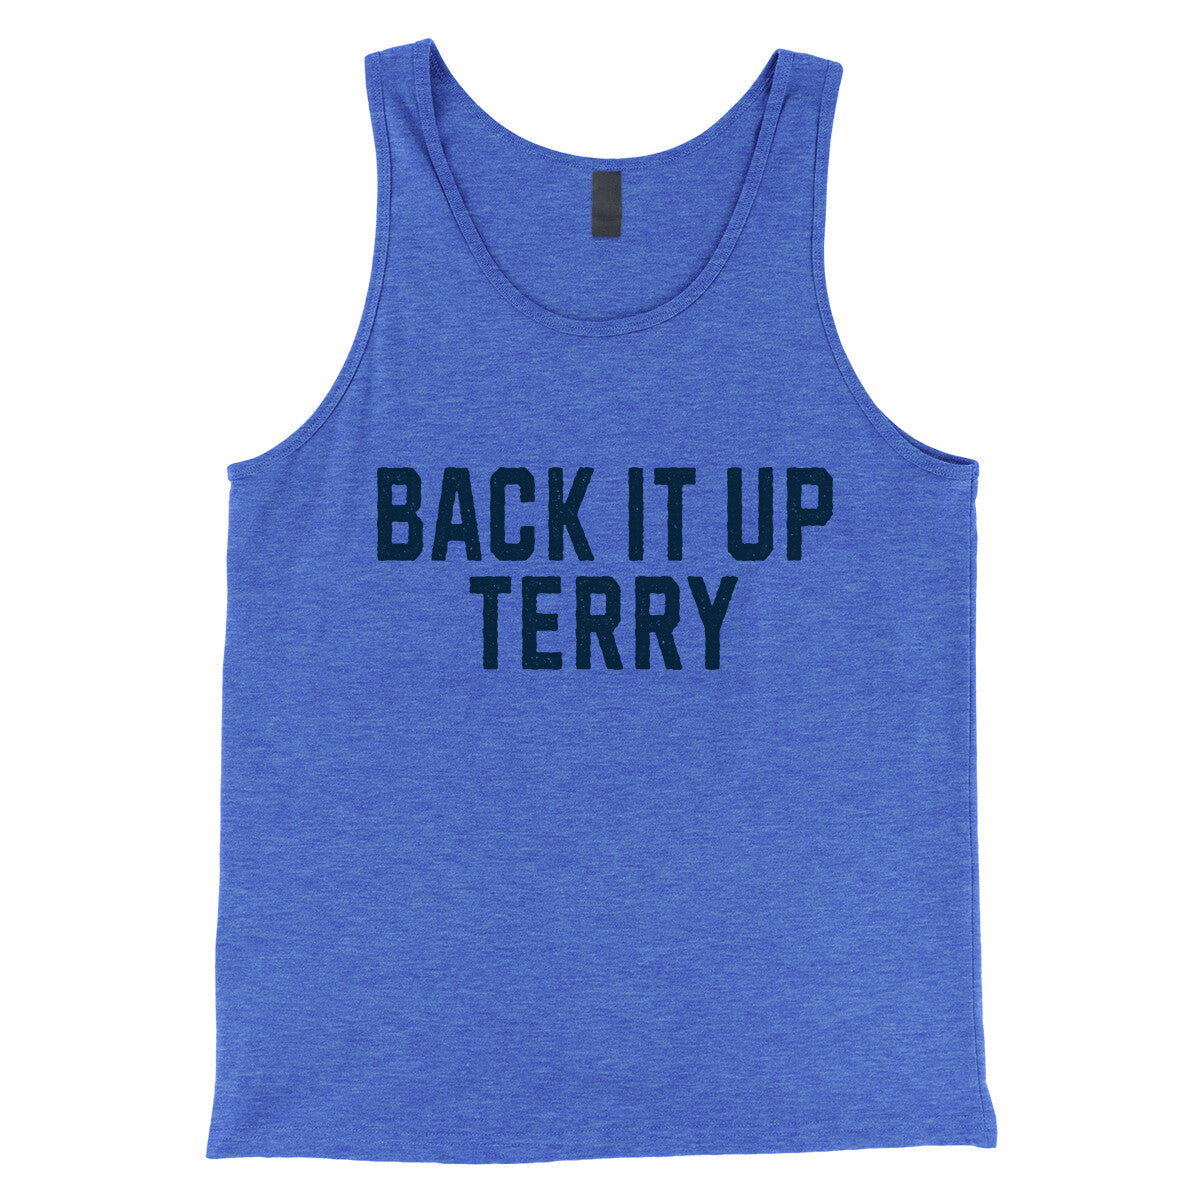 Back it up Terry in True Royal TriBlend Color